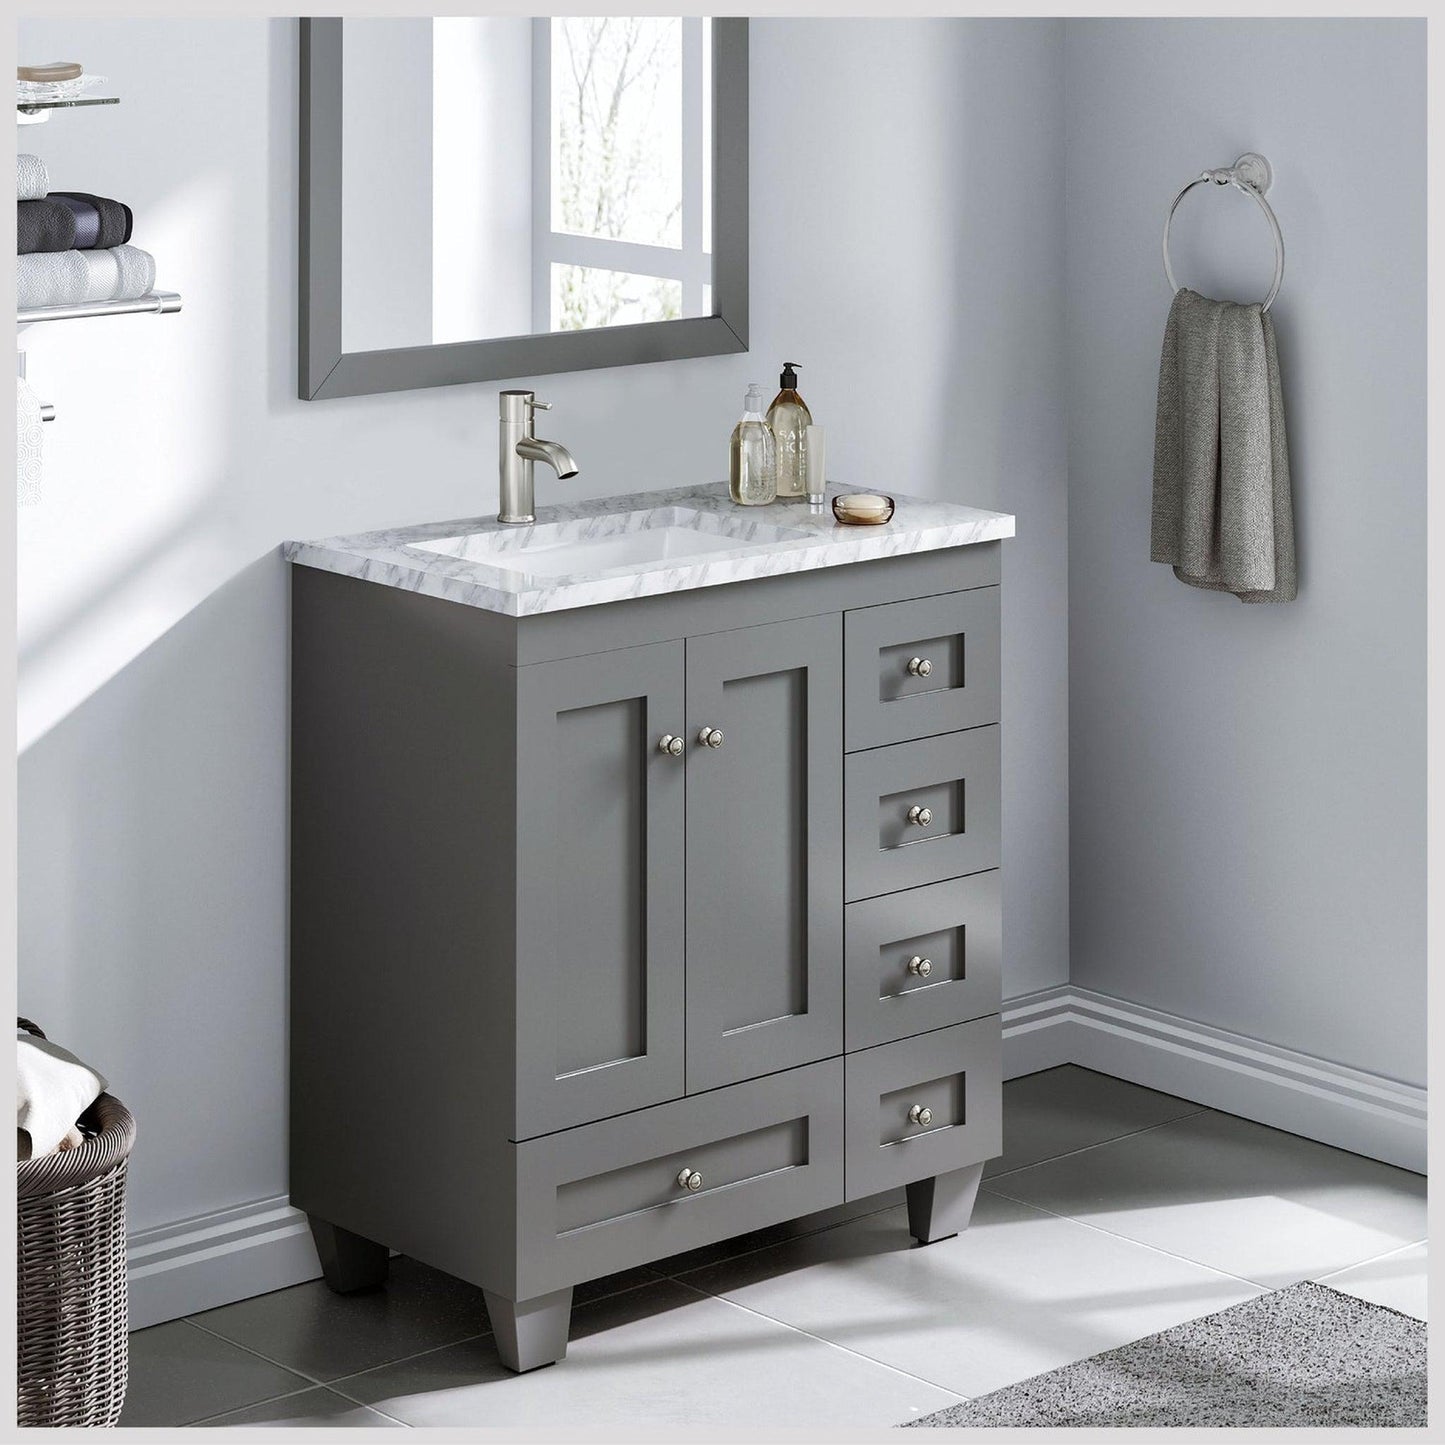 Eviva Happy 28" x 34" Gray Freestanding Bathroom Vanity With White Carrara Marble Top and Single Undermount Porcelain Sink